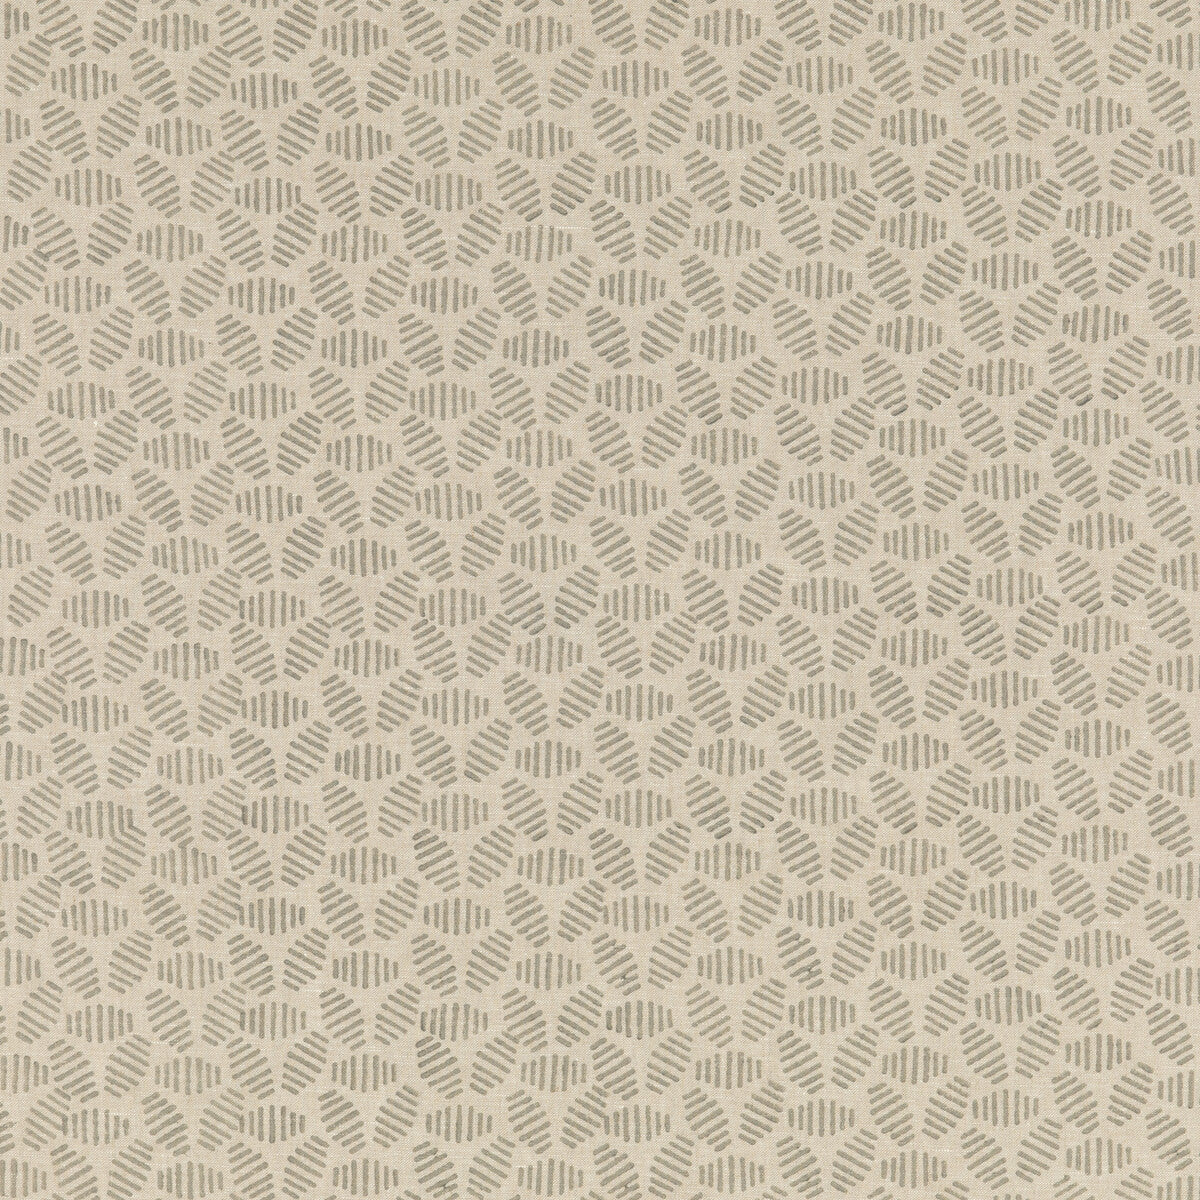 Bumble Bee fabric in stone color - pattern PP50482.4.0 - by Baker Lifestyle in the Block Party collection